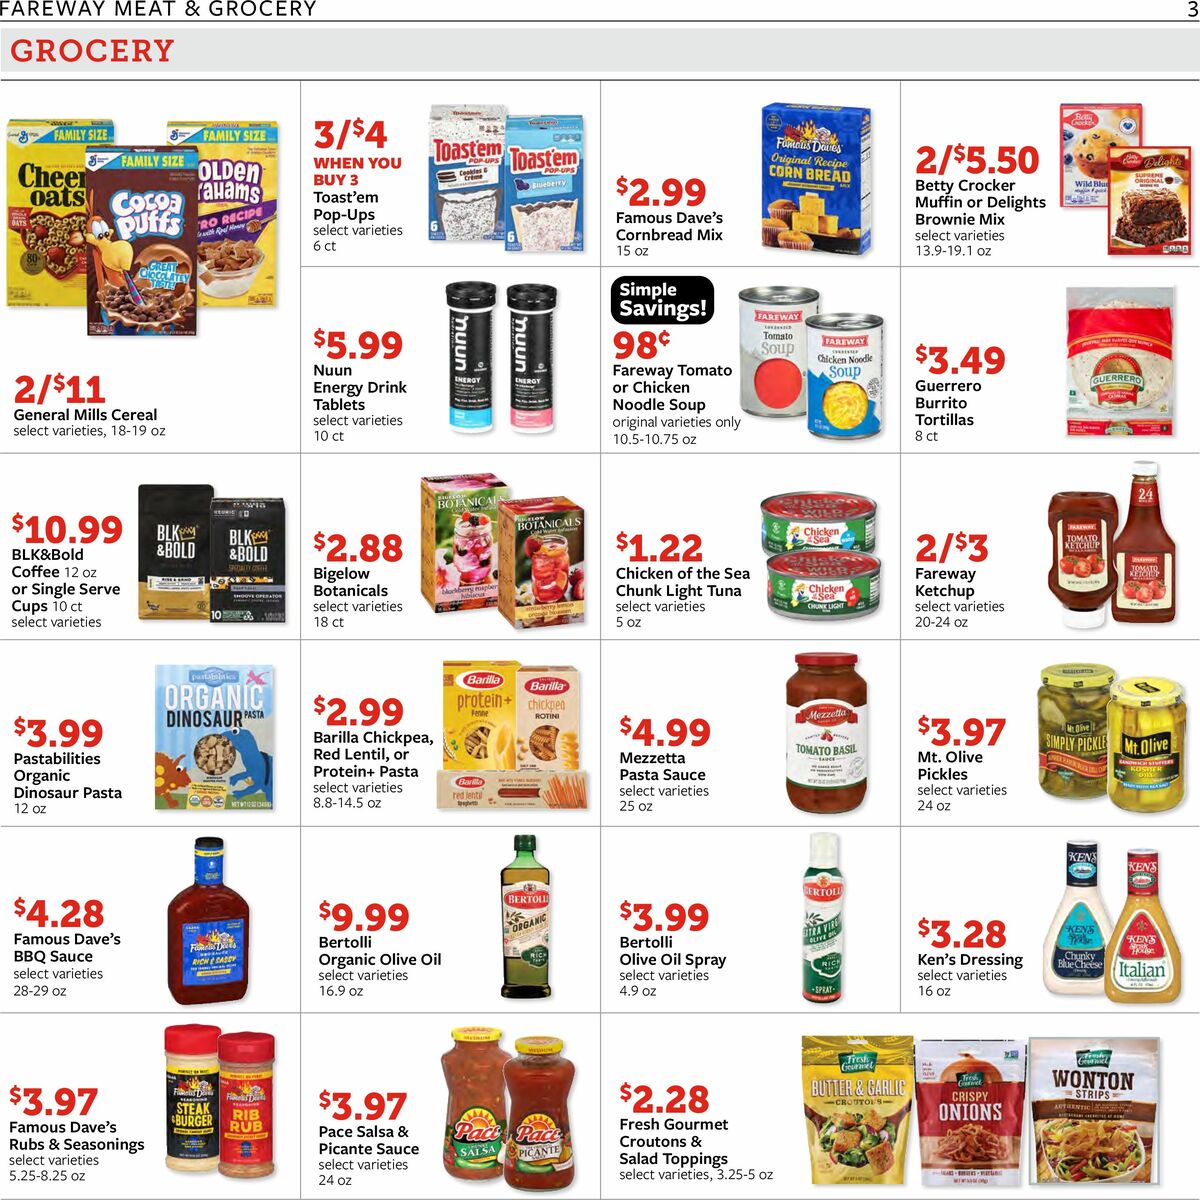 Fareway Weekly Ad from September 18